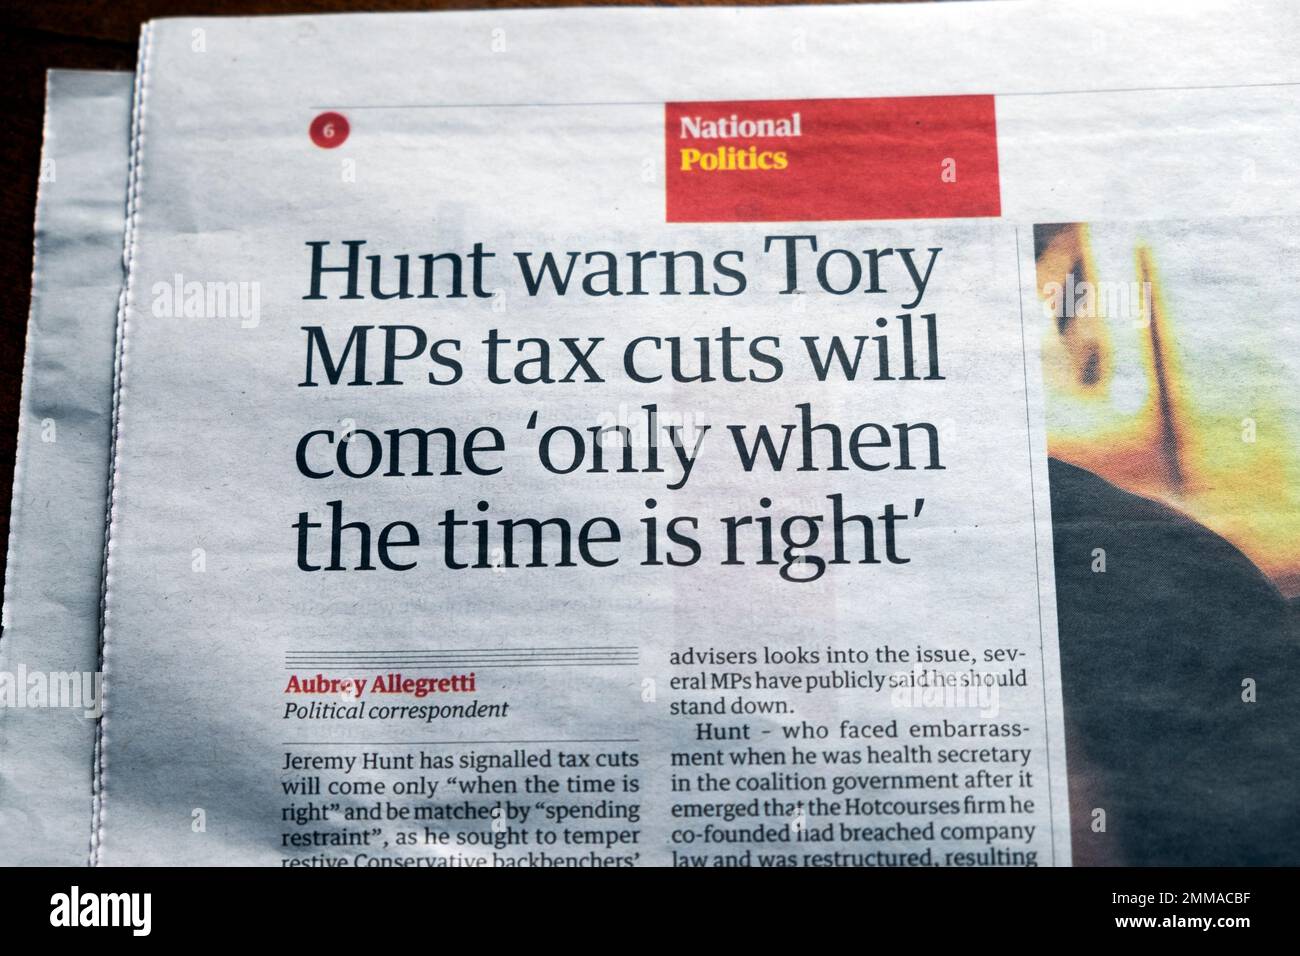 Jeremy 'Hunt warns Tory MPs tax cuts will come 'only when the time is right' Guardian newspaper headline speech article 27 January 2023 London UK Stock Photo